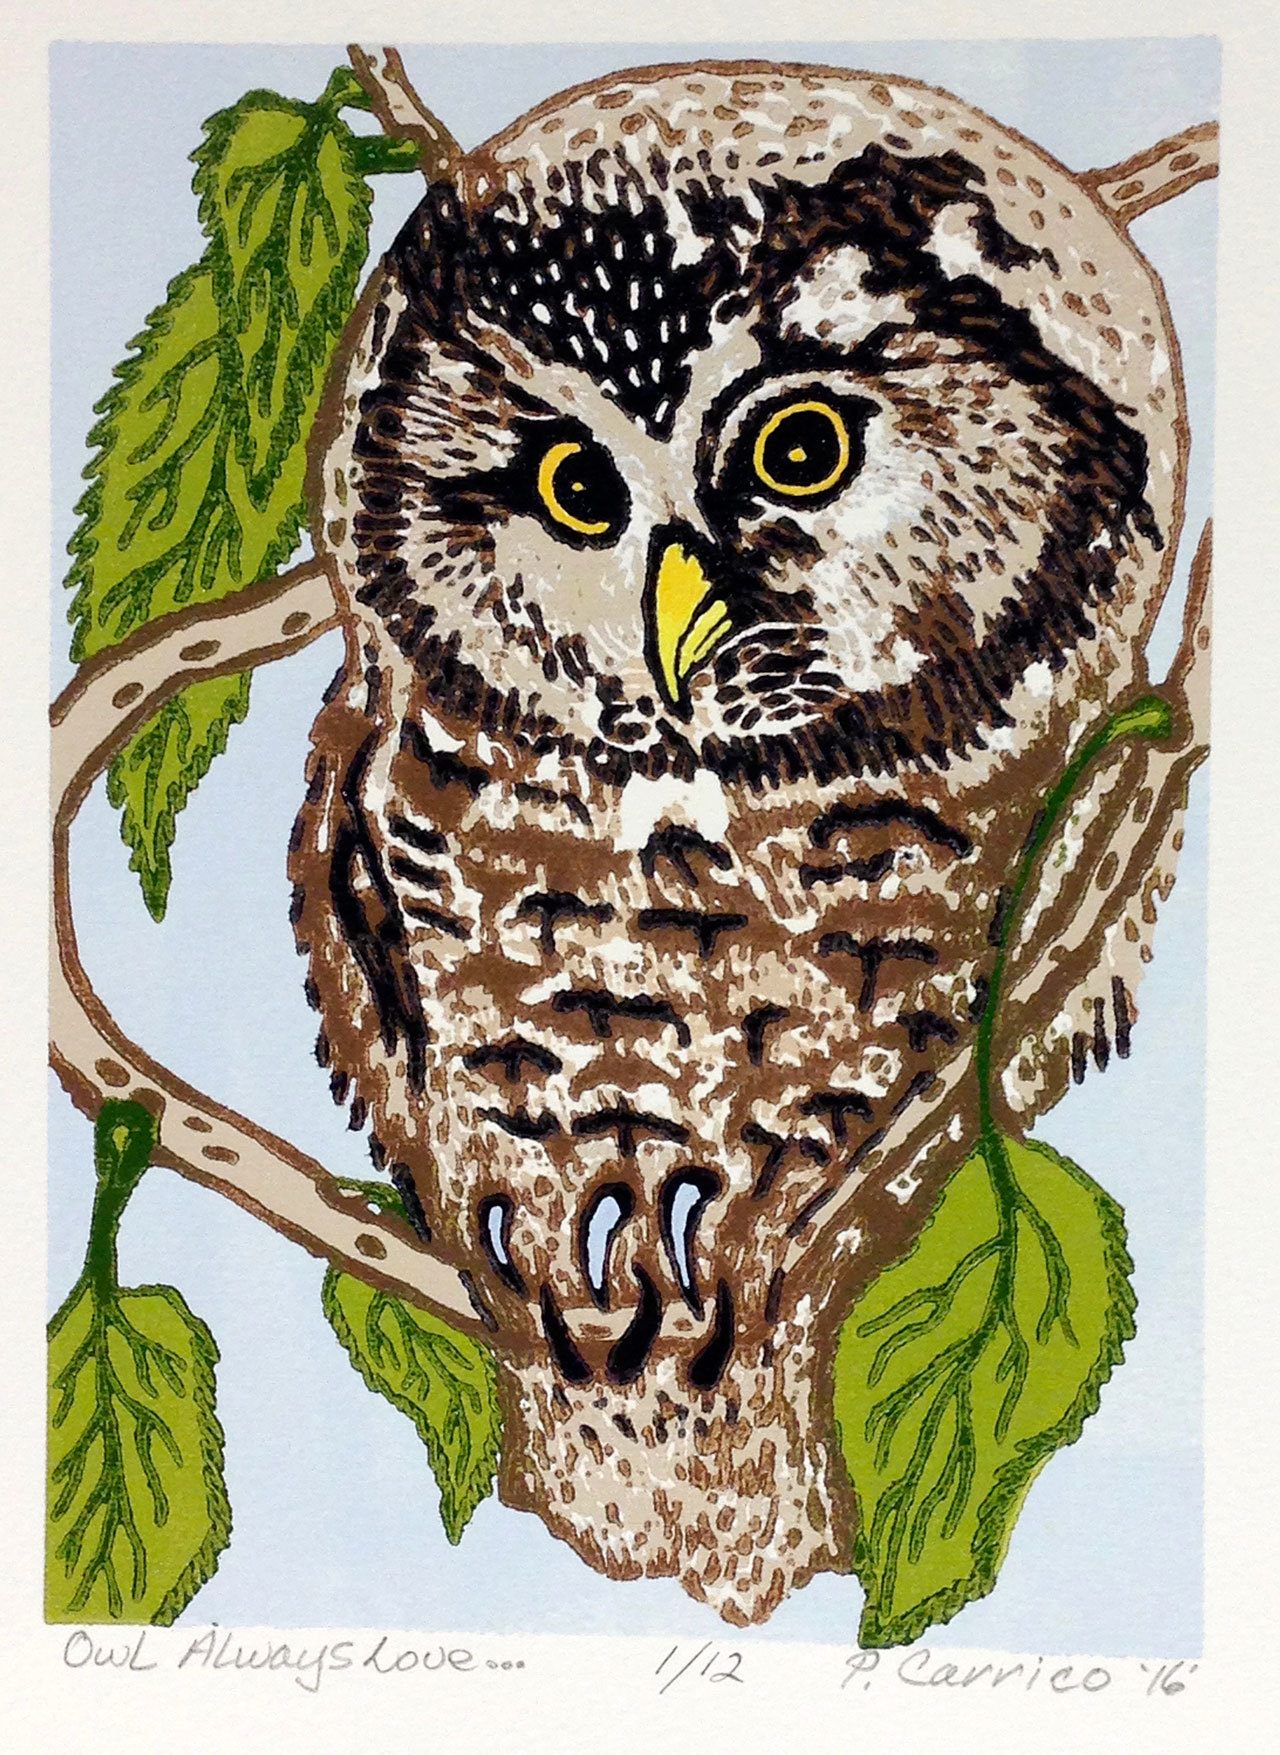 ”Owls Always Love …” by Philip Carrico is part of an exhibit at the Port Townsend Gallery.